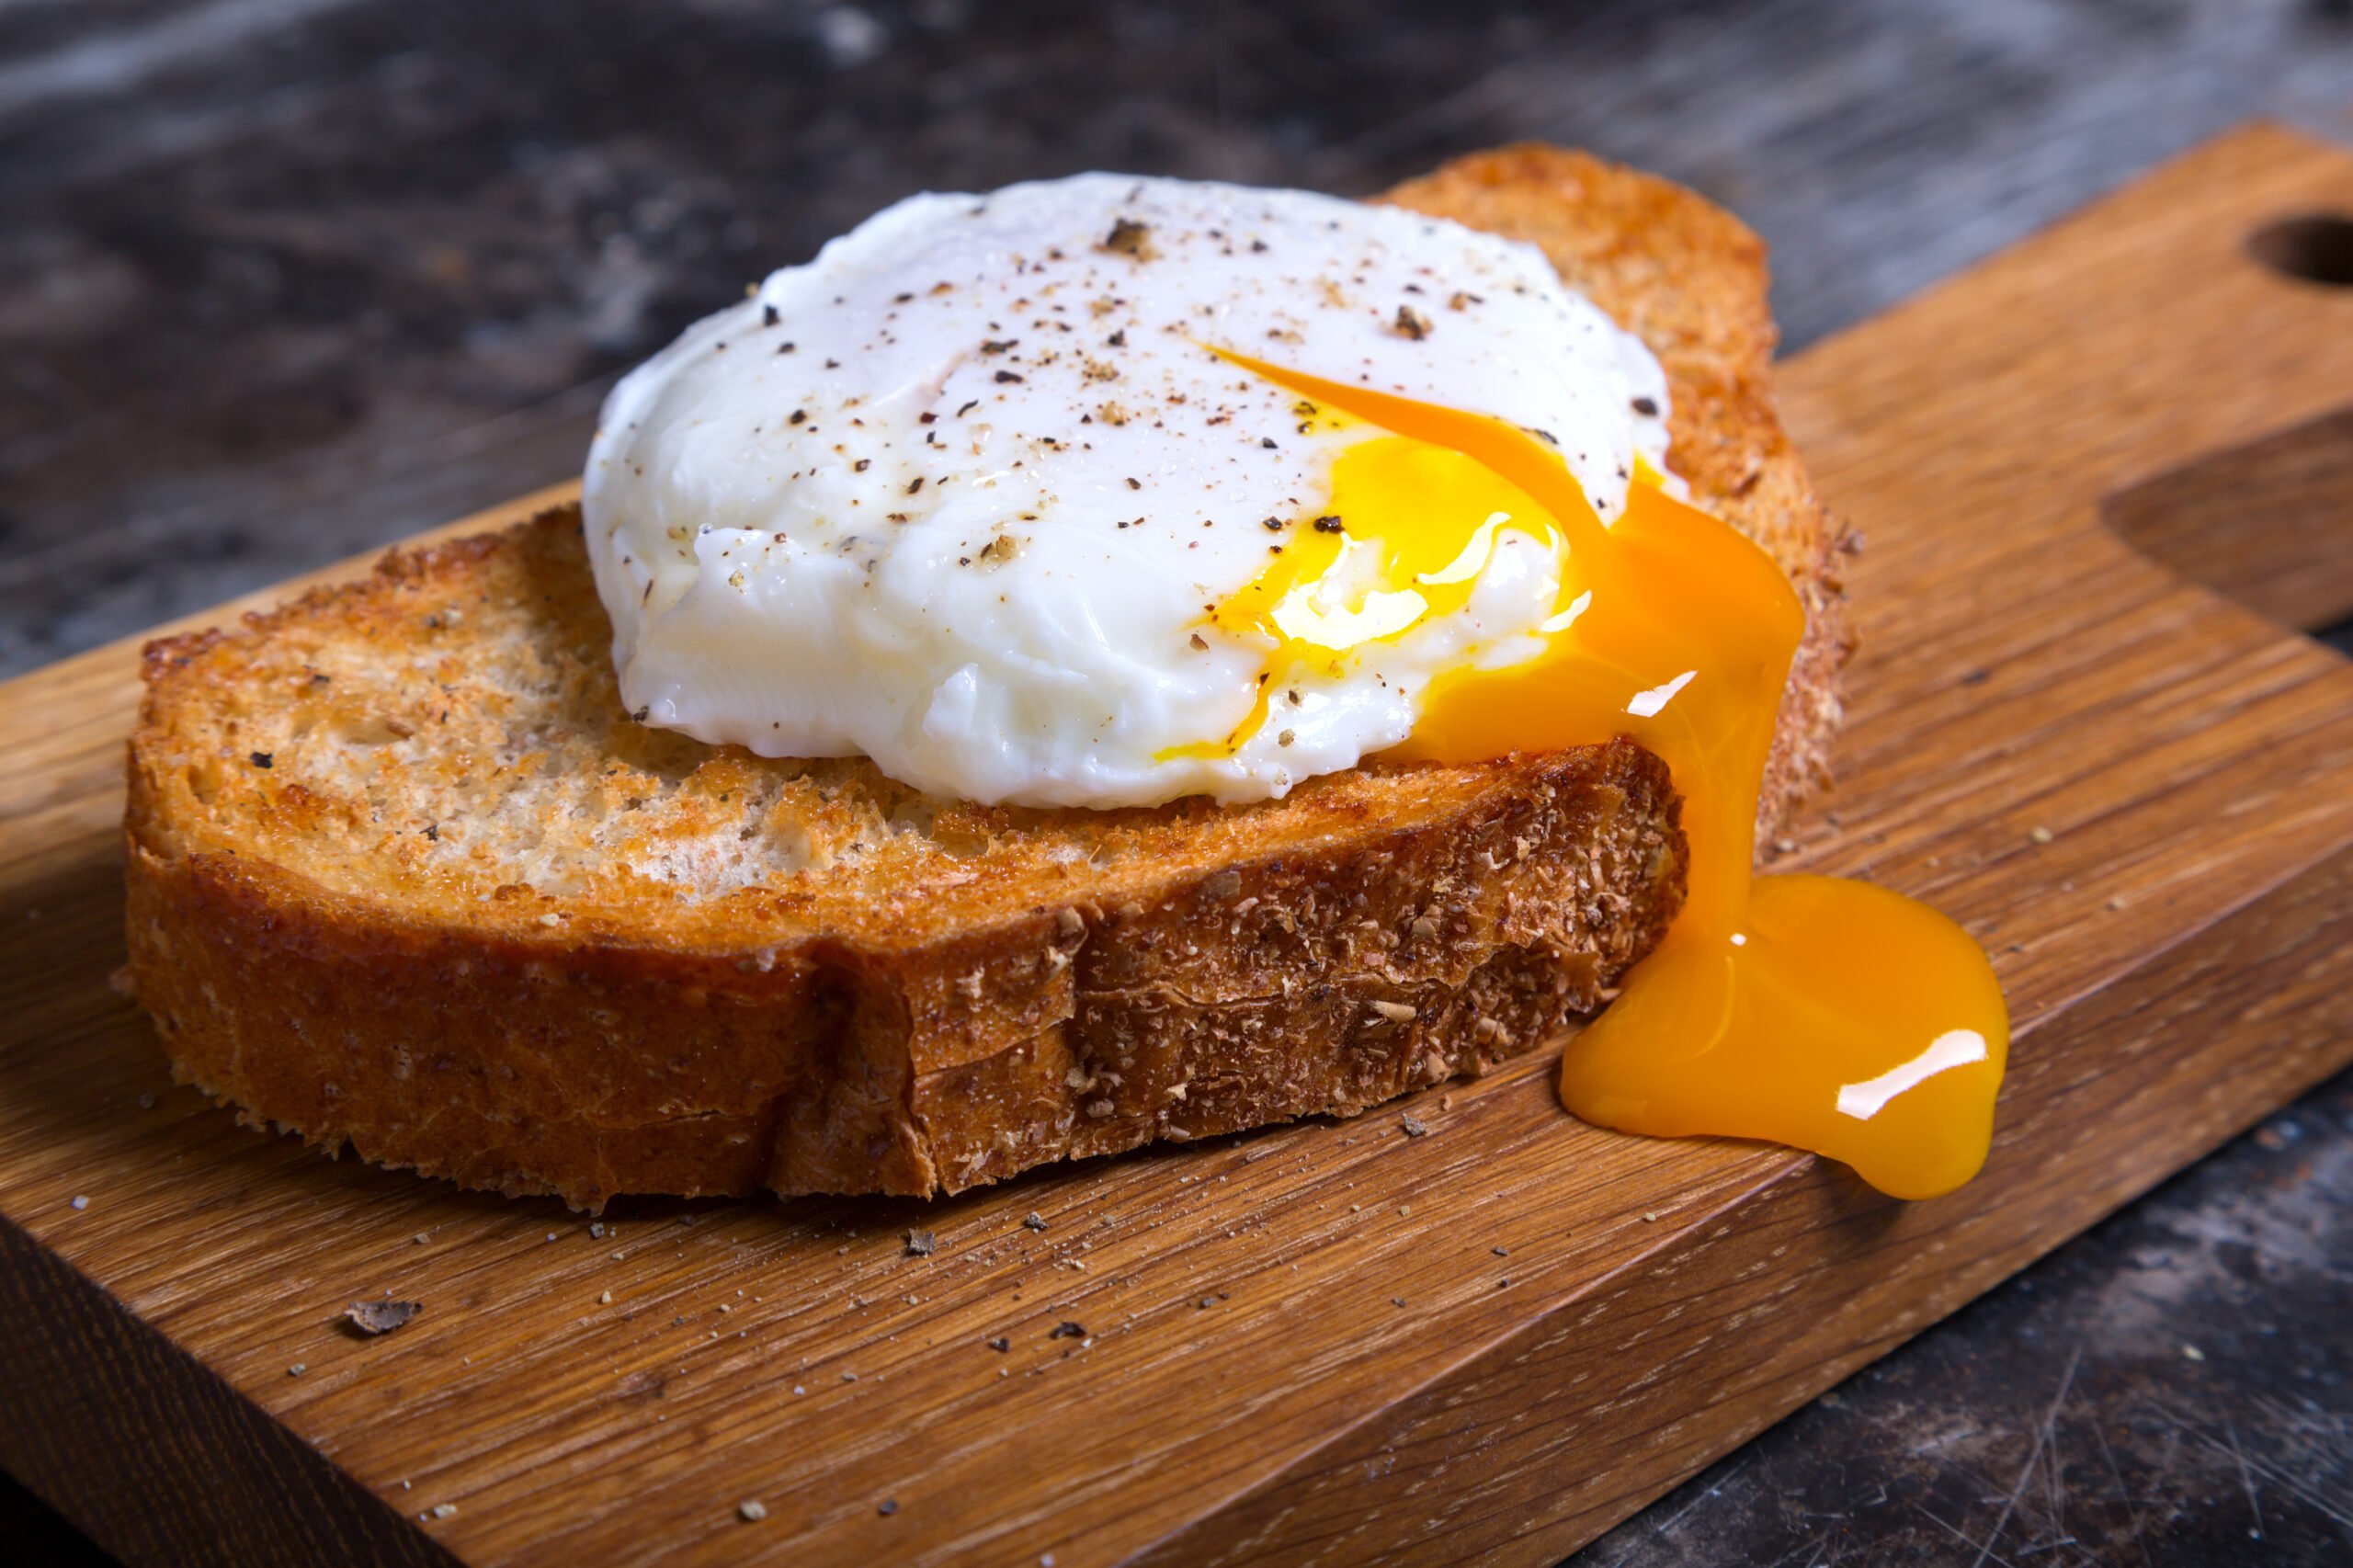 Now You can Make that Microwaved Poached Eggs Without Using Special Tools